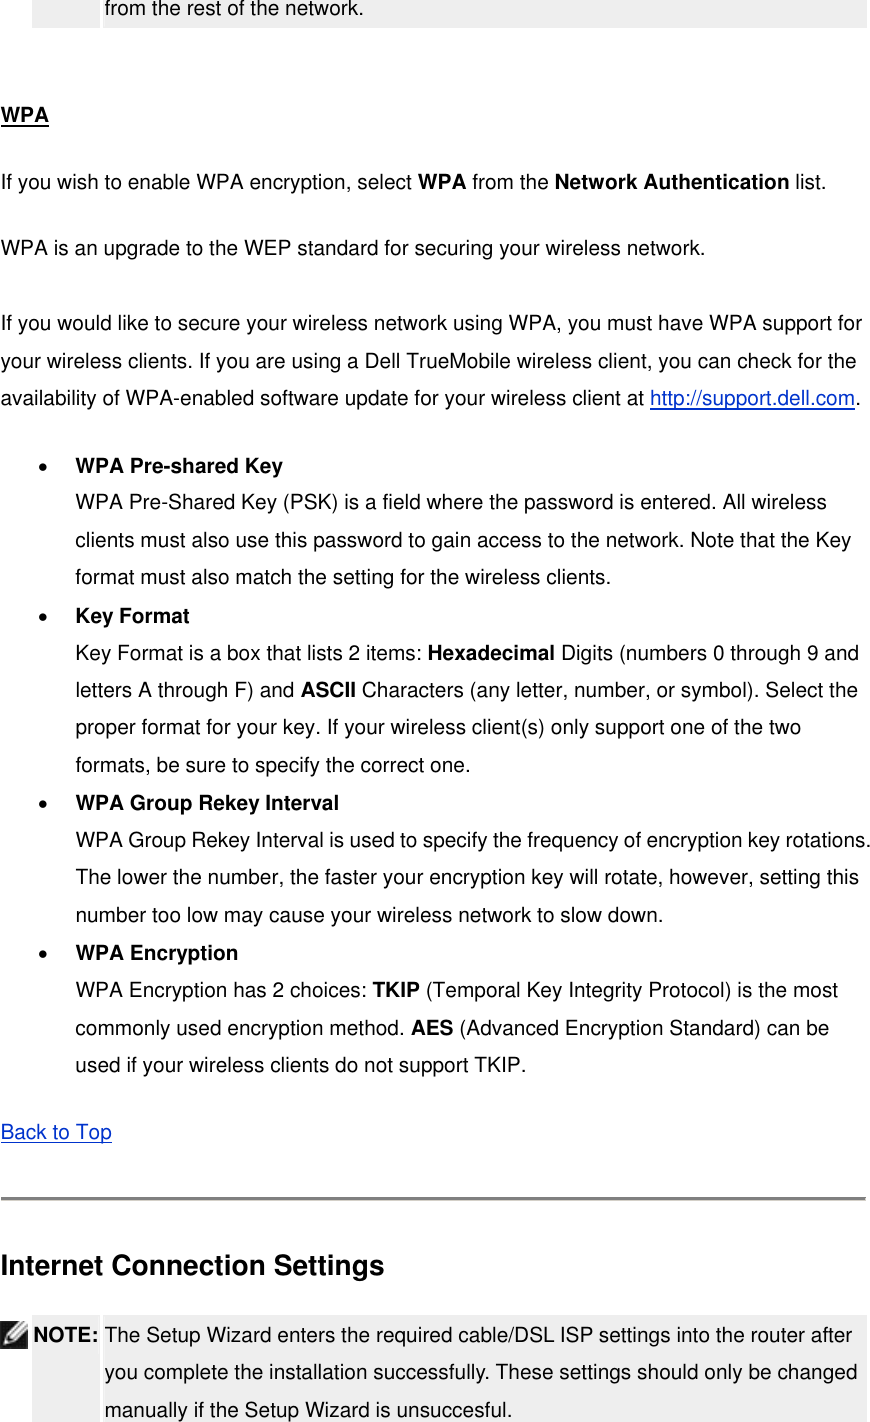 from the rest of the network.    WPA If you wish to enable WPA encryption, select WPA from the Network Authentication list. WPA is an upgrade to the WEP standard for securing your wireless network.    If you would like to secure your wireless network using WPA, you must have WPA support for your wireless clients. If you are using a Dell TrueMobile wireless client, you can check for the availability of WPA-enabled software update for your wireless client at http://support.dell.com. •  WPA Pre-shared Key WPA Pre-Shared Key (PSK) is a field where the password is entered. All wireless clients must also use this password to gain access to the network. Note that the Key format must also match the setting for the wireless clients. •  Key Format Key Format is a box that lists 2 items: Hexadecimal Digits (numbers 0 through 9 and letters A through F) and ASCII Characters (any letter, number, or symbol). Select the proper format for your key. If your wireless client(s) only support one of the two formats, be sure to specify the correct one. •  WPA Group Rekey Interval WPA Group Rekey Interval is used to specify the frequency of encryption key rotations. The lower the number, the faster your encryption key will rotate, however, setting this number too low may cause your wireless network to slow down. •  WPA Encryption WPA Encryption has 2 choices: TKIP (Temporal Key Integrity Protocol) is the most commonly used encryption method. AES (Advanced Encryption Standard) can be used if your wireless clients do not support TKIP. Back to Top   Internet Connection Settings  NOTE: The Setup Wizard enters the required cable/DSL ISP settings into the router after you complete the installation successfully. These settings should only be changed manually if the Setup Wizard is unsuccesful.   